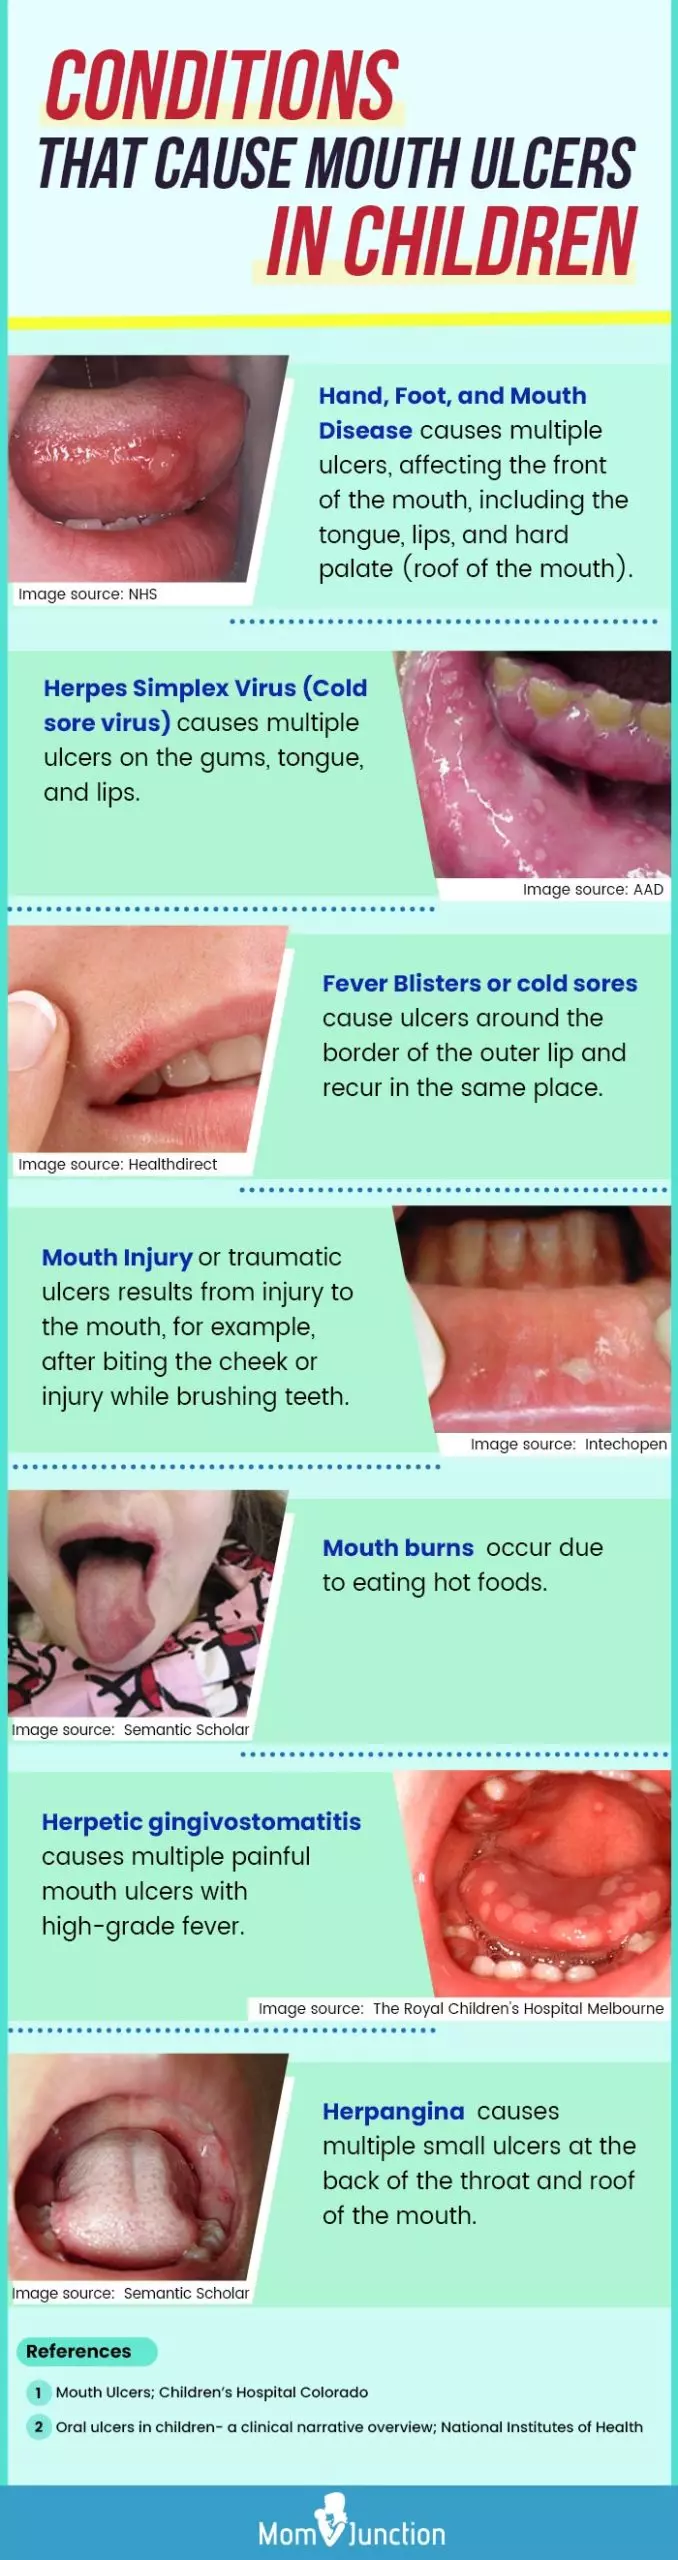 conditions that cause mouth ulcers in children (infographic)